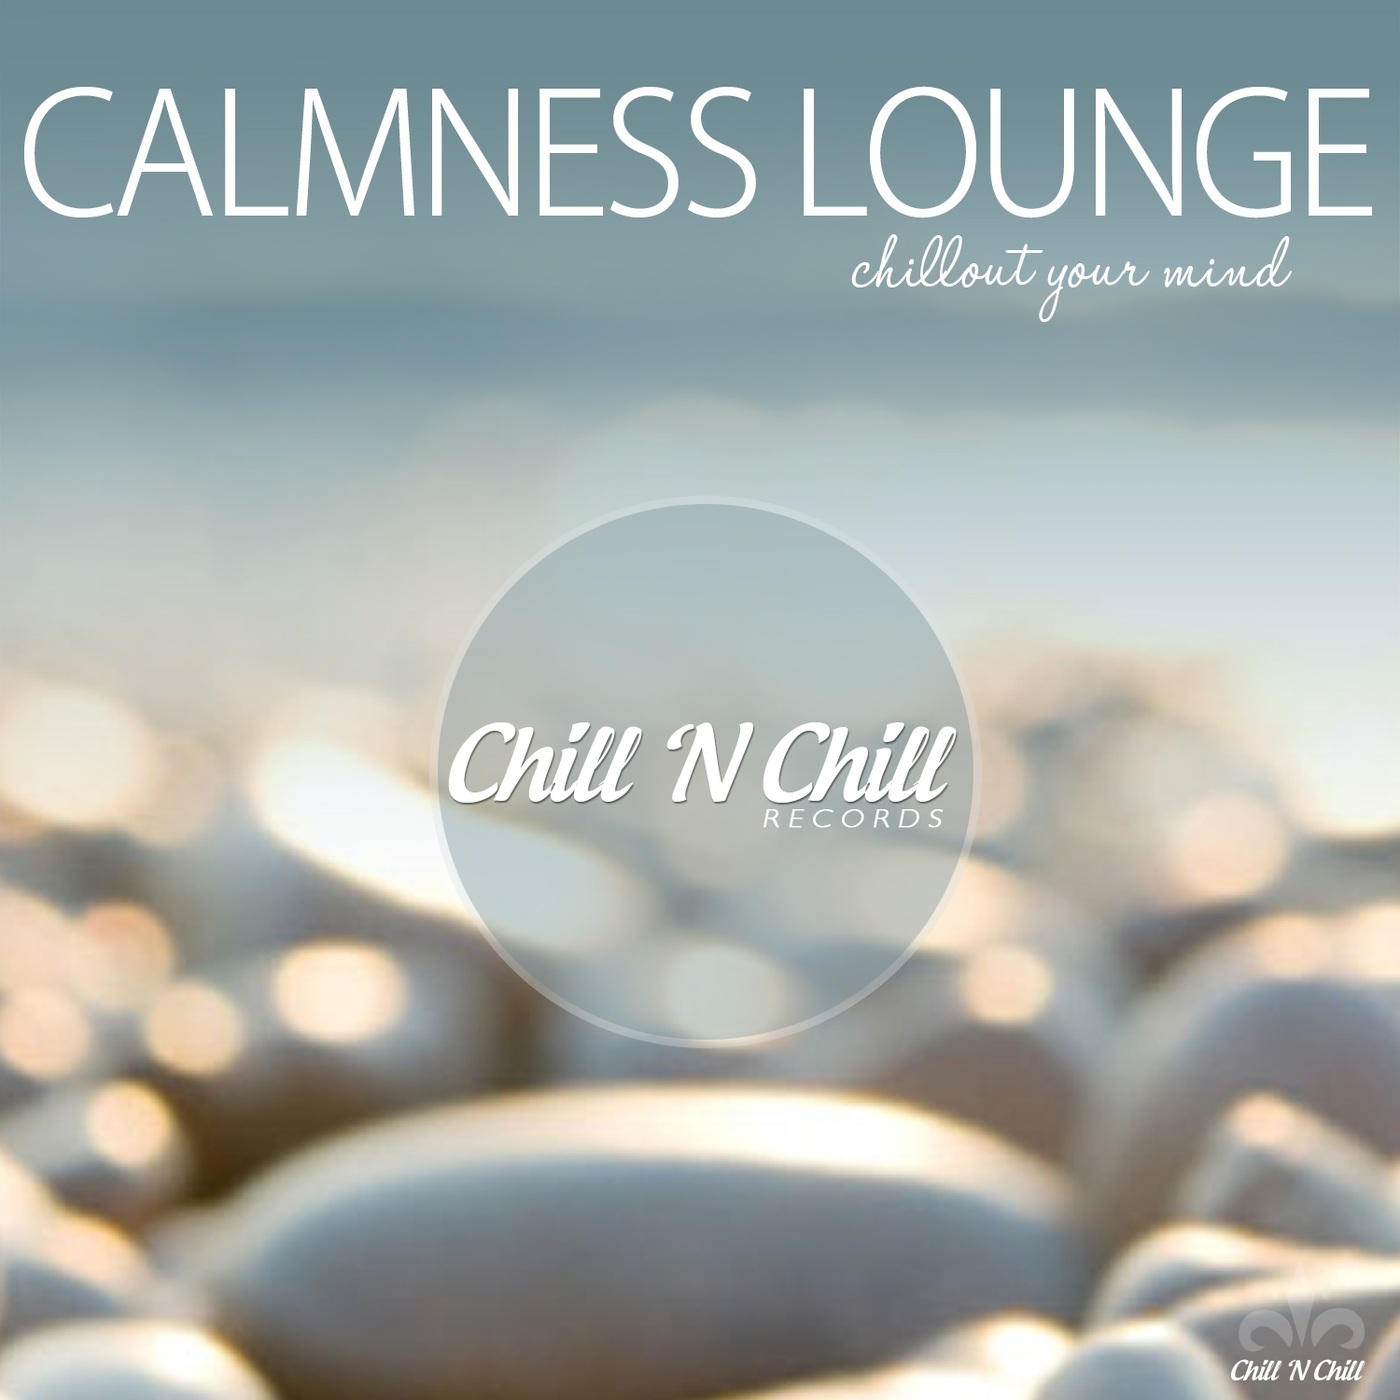 chill n chill records《calmness lounge：chillout your mind》cd级无损